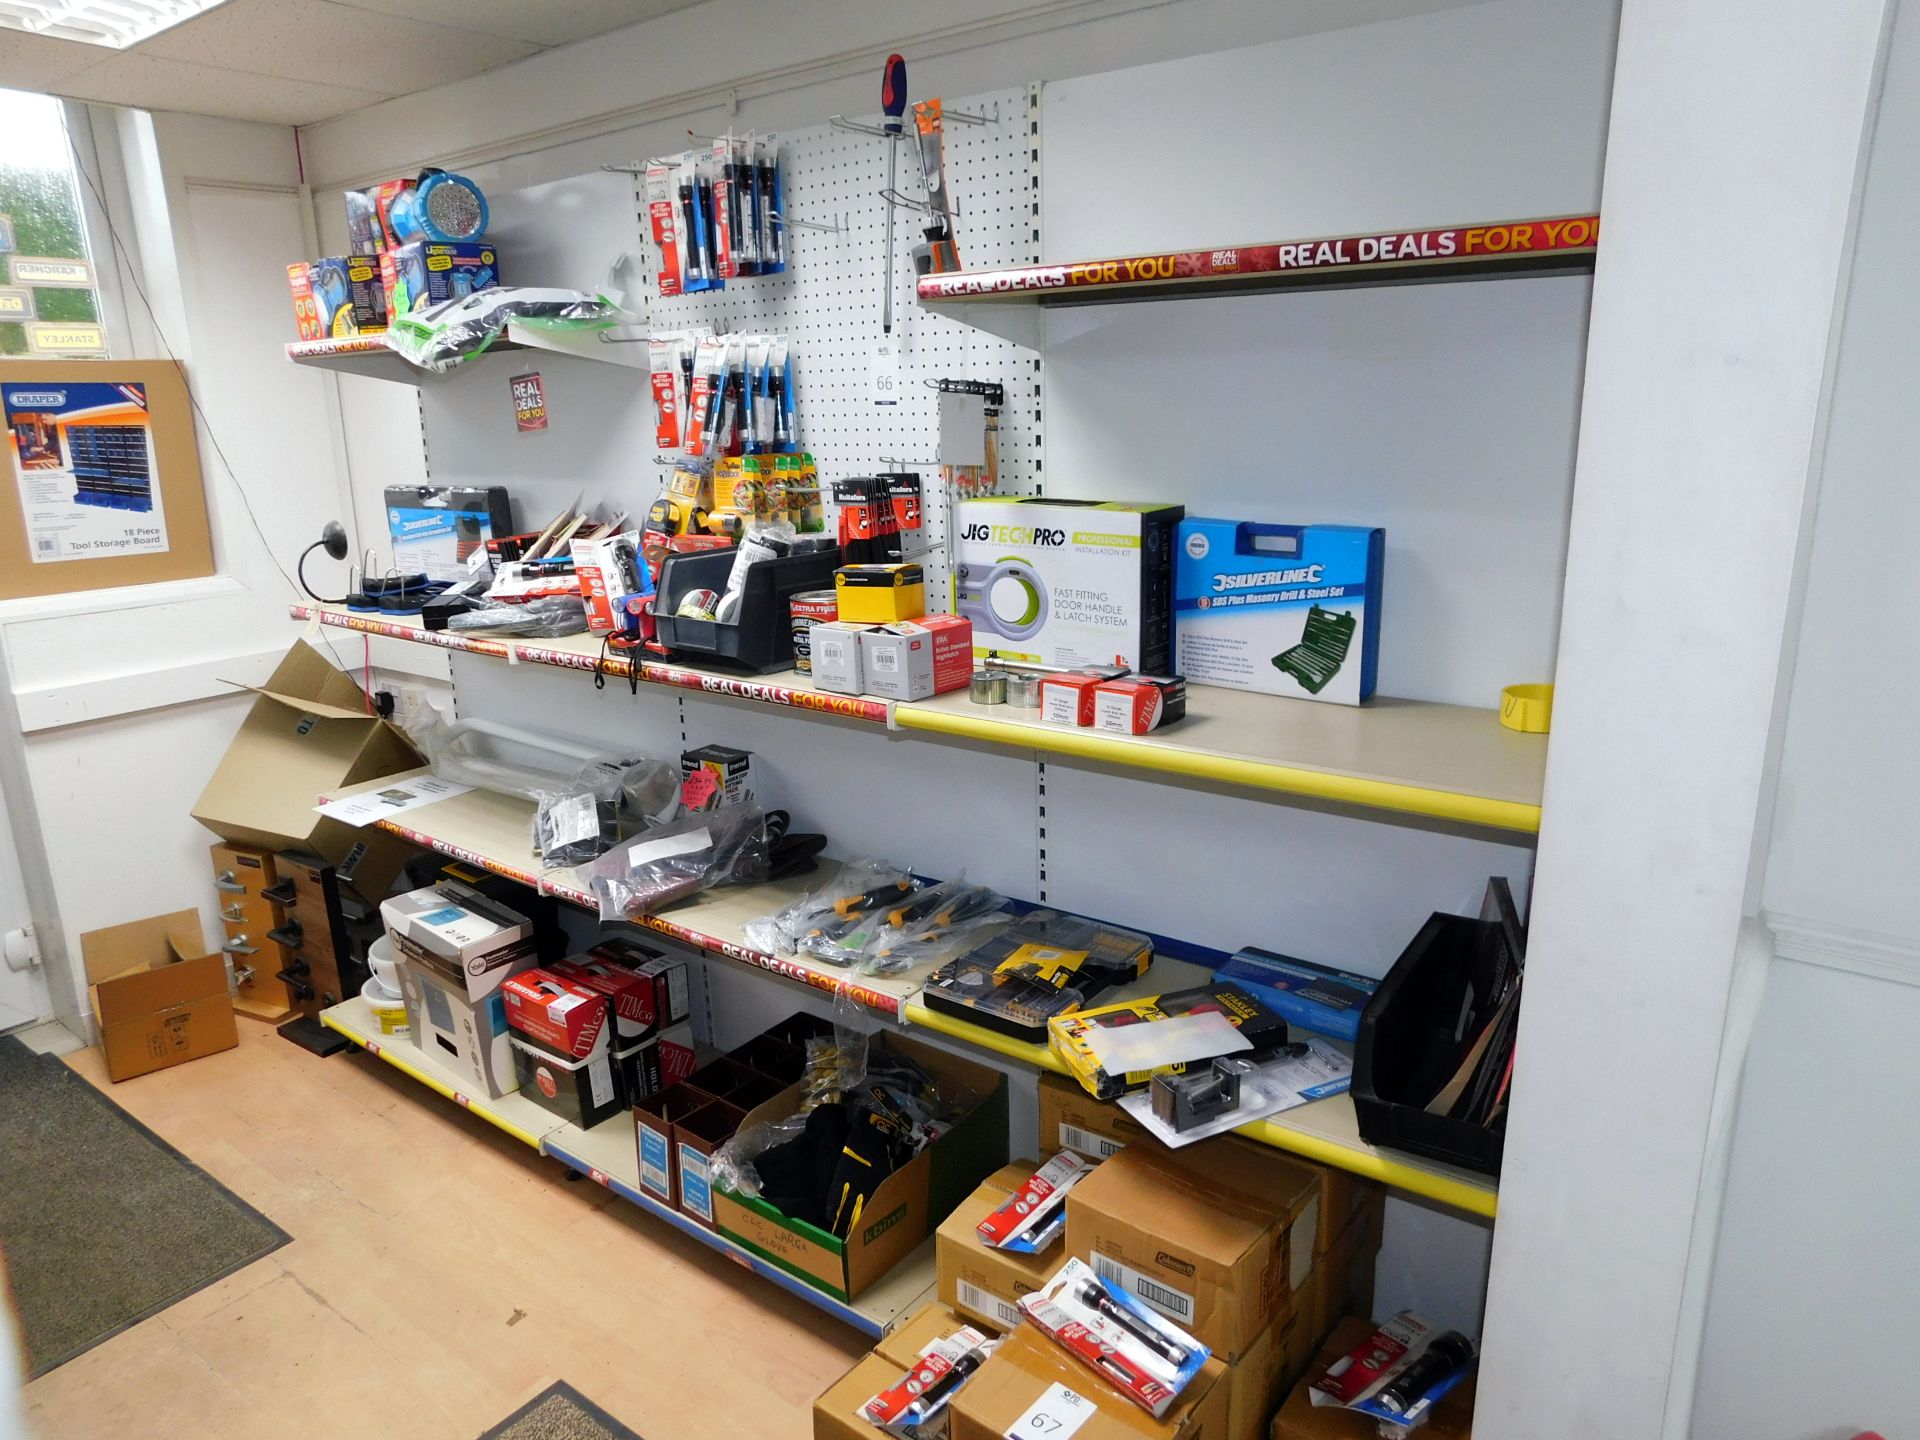 Contents of Wall to Include Torches, Screwdriver Sets, Mousetraps, Tools, Work Gloves (Excludes